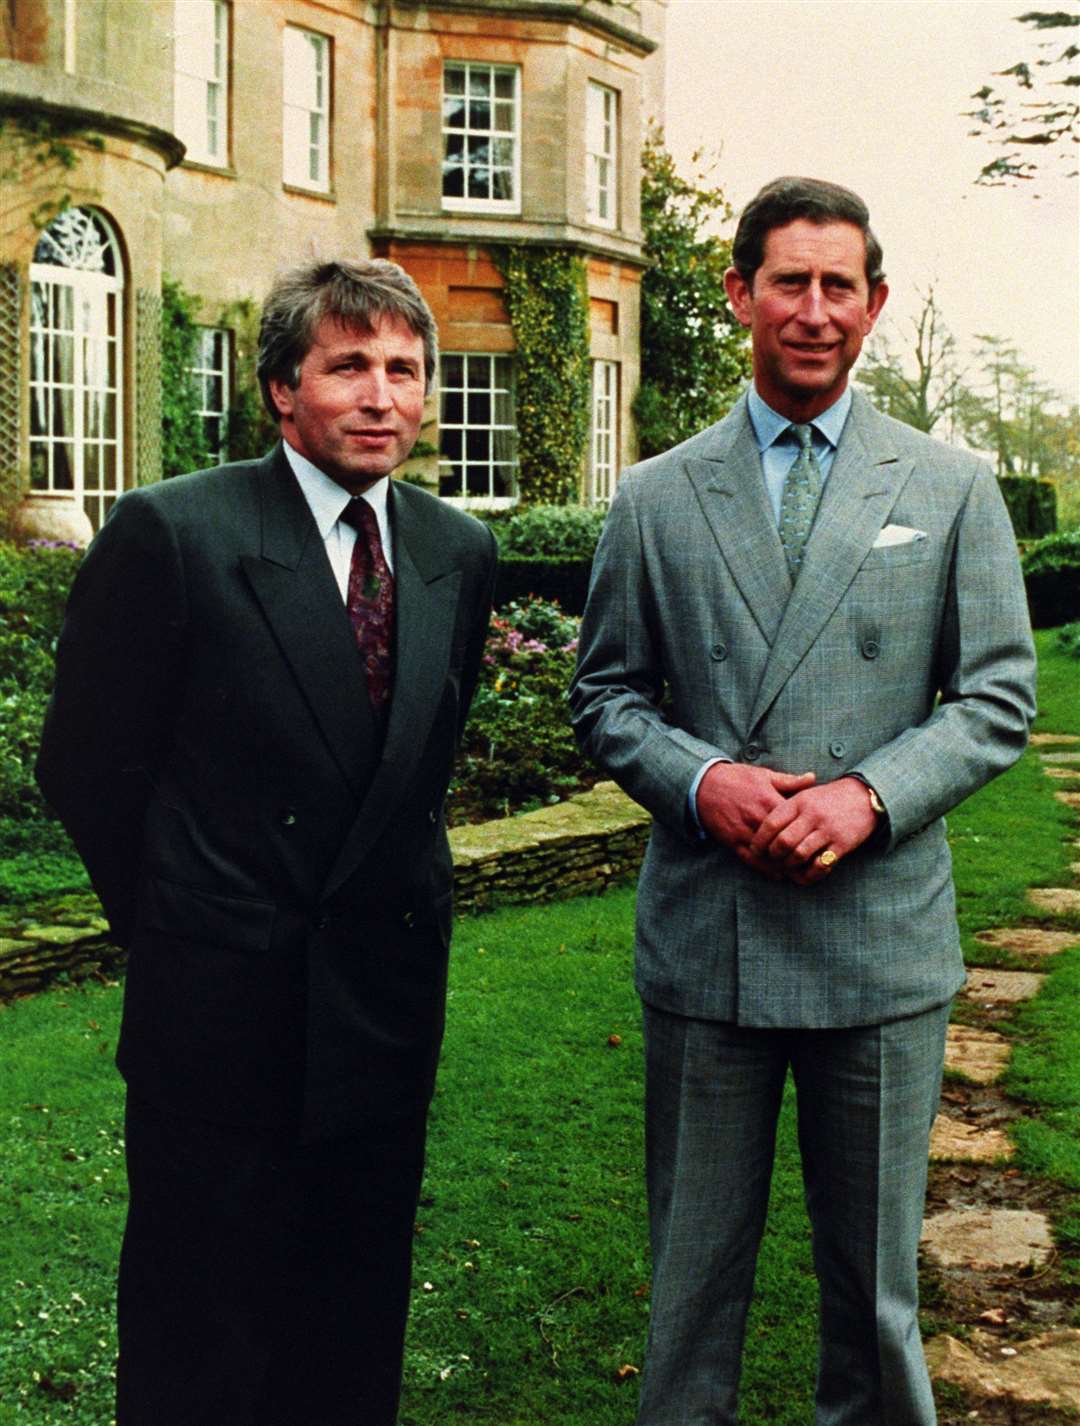 The Prince of Wales and Jonathan Dimbleby at Highgrove during the filming of the television documentary Charles the private man, the public role (PA)